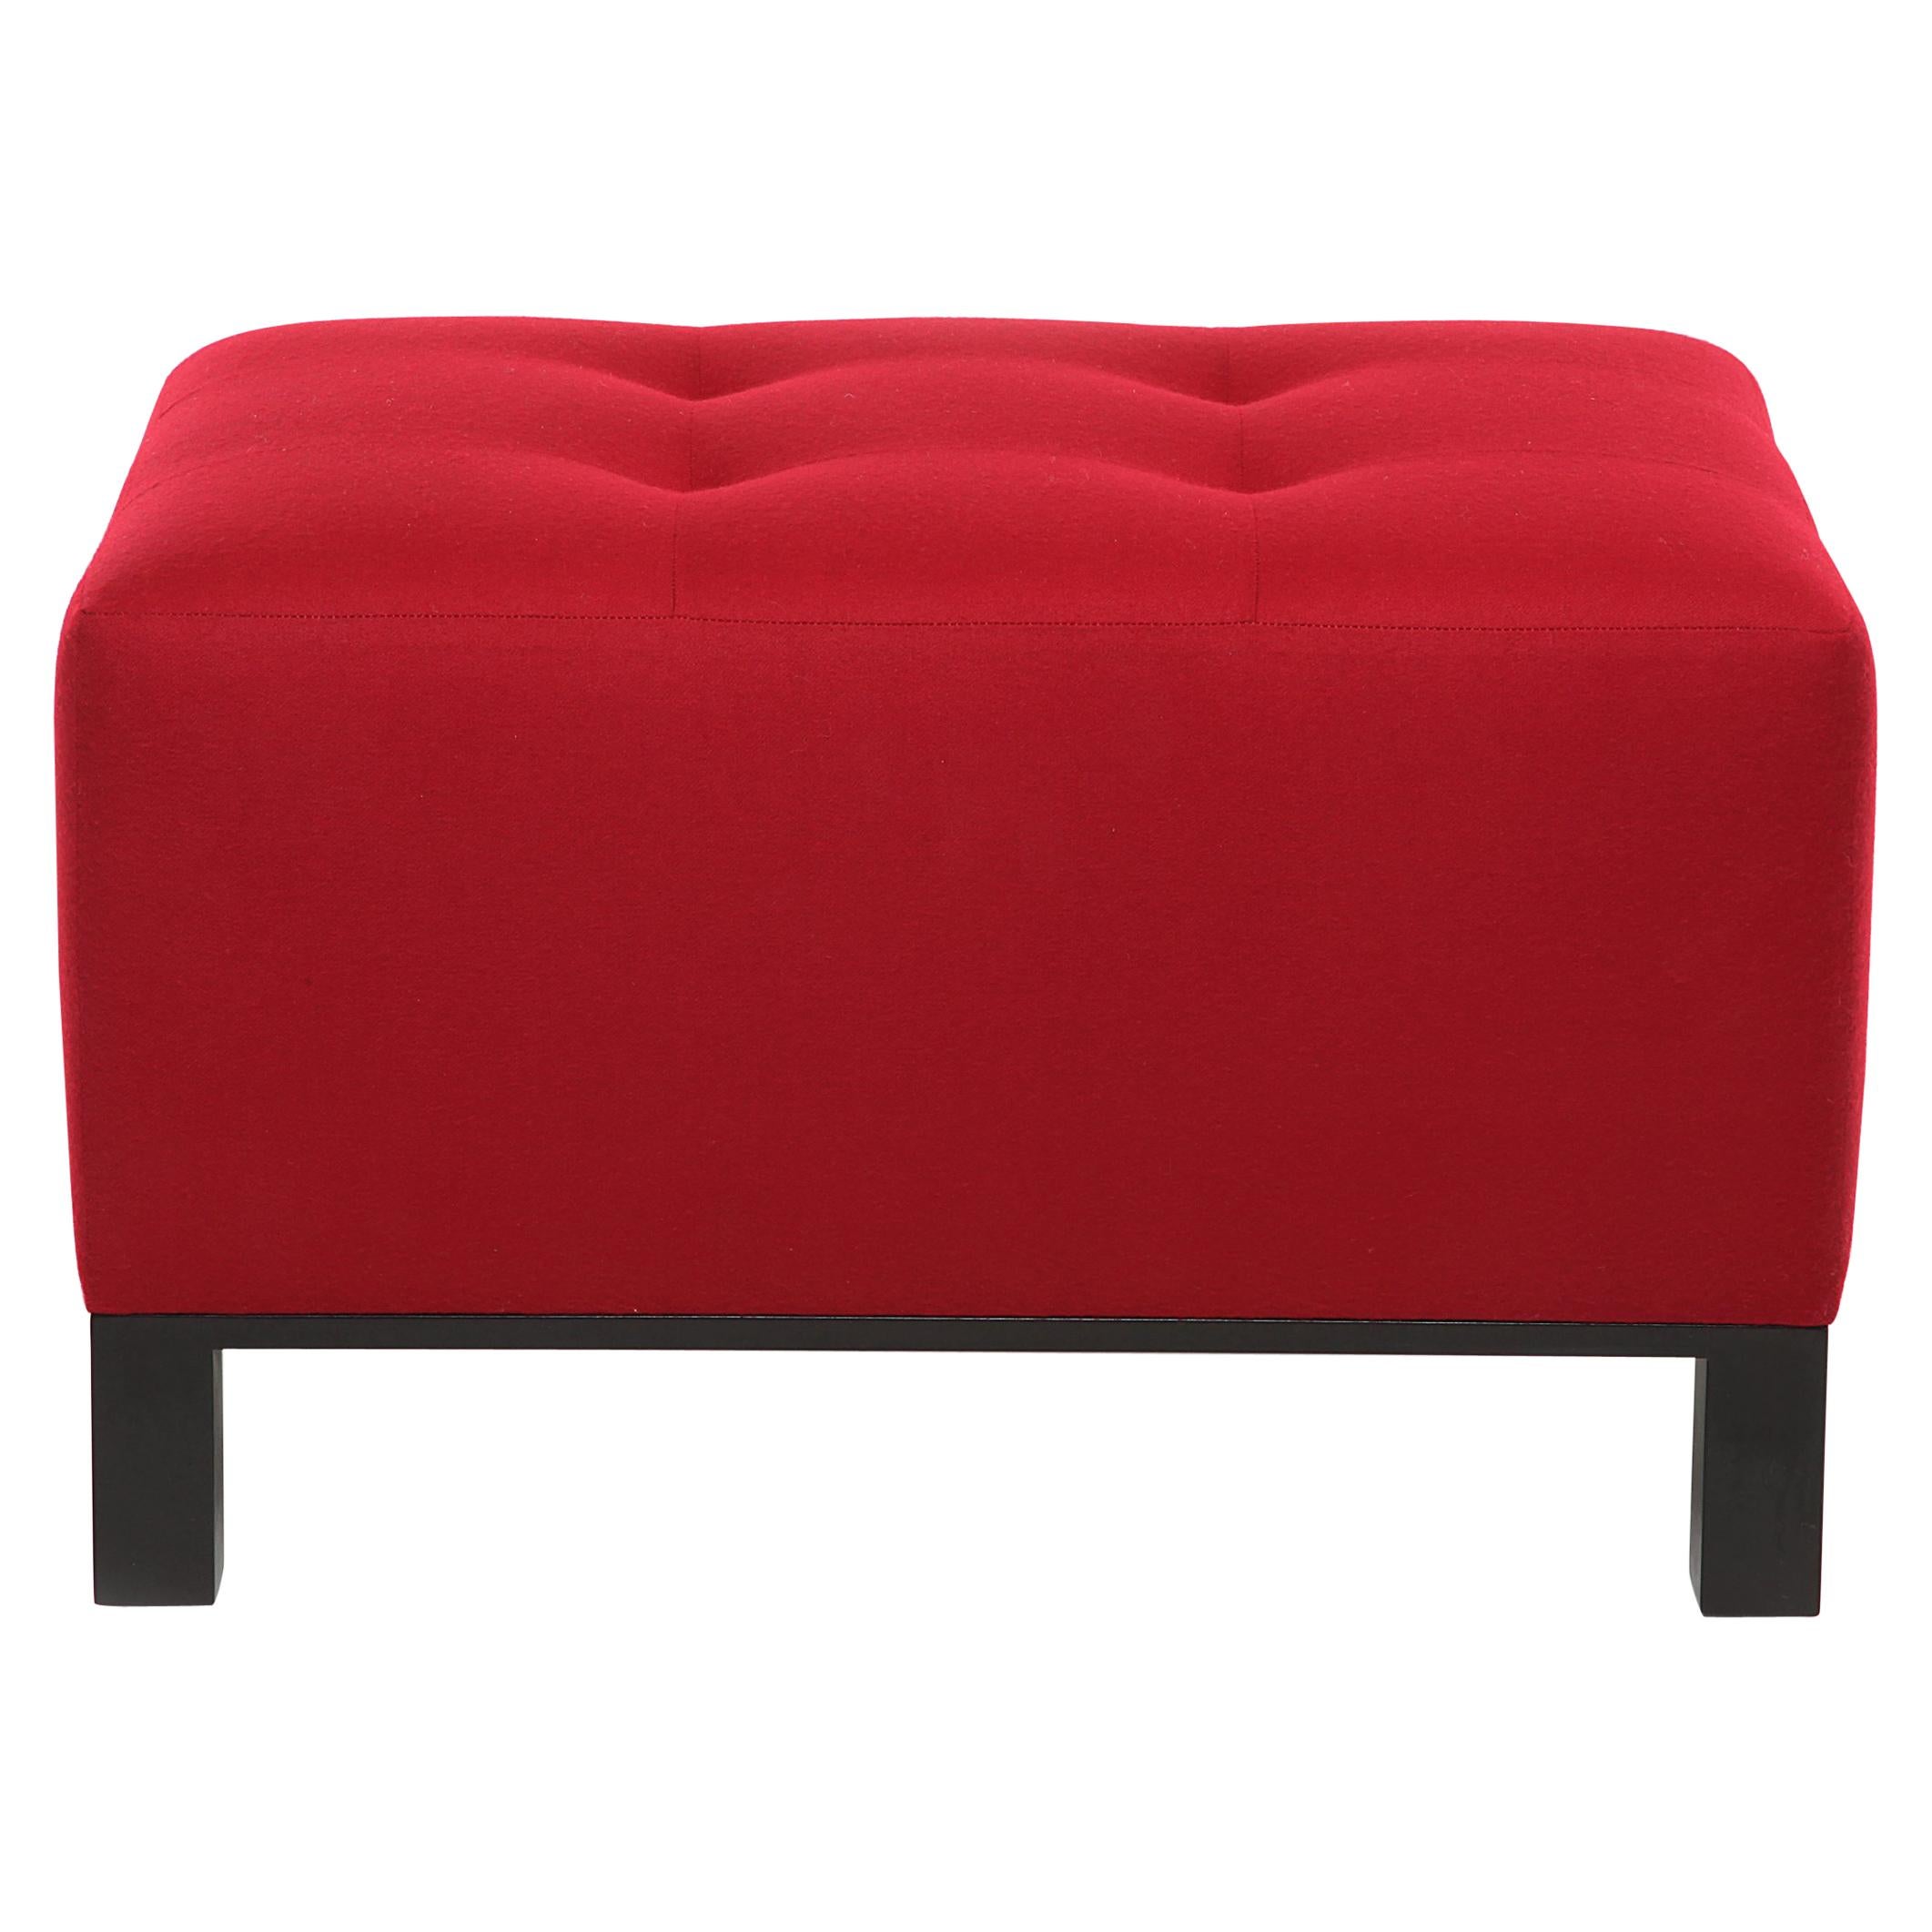 Wooster Ottoman custom ottoman tufted wood base red pull tufted tight seat wood 